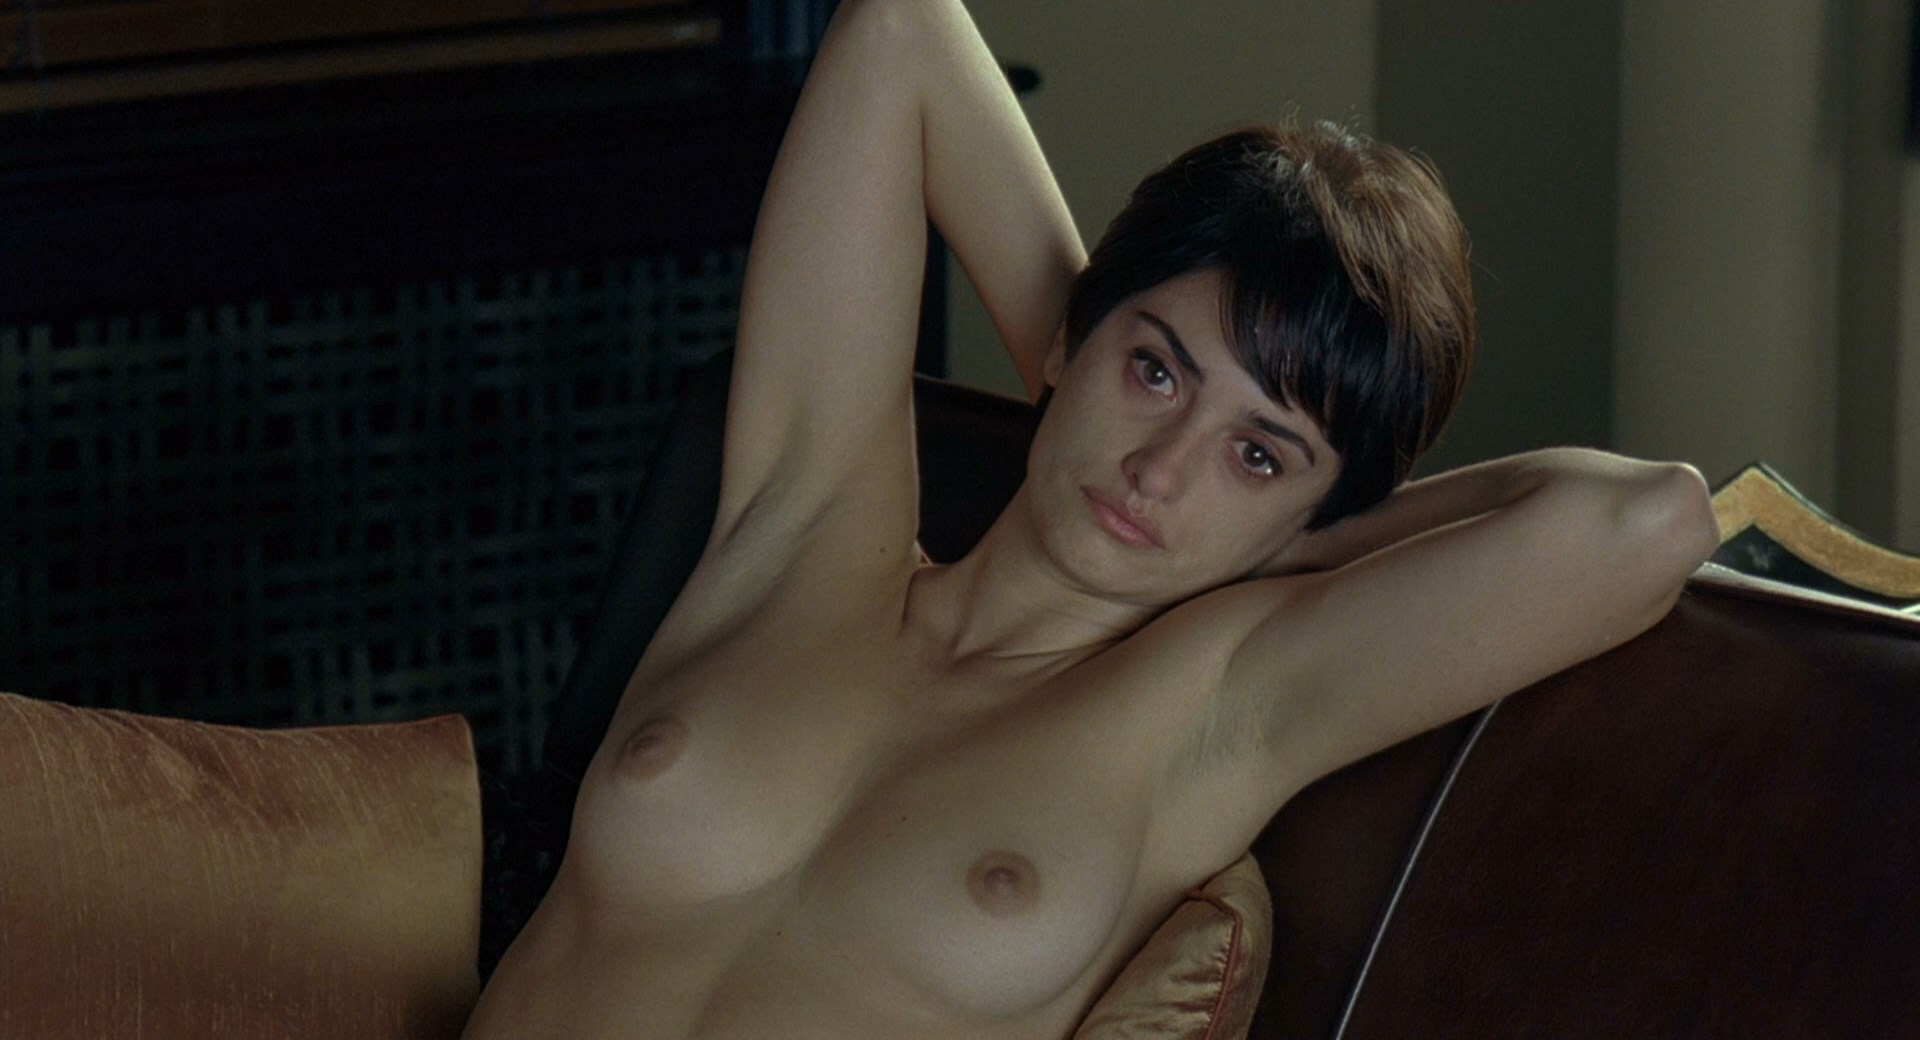 Penelope Cruz shows her tits while sitting on the couch.